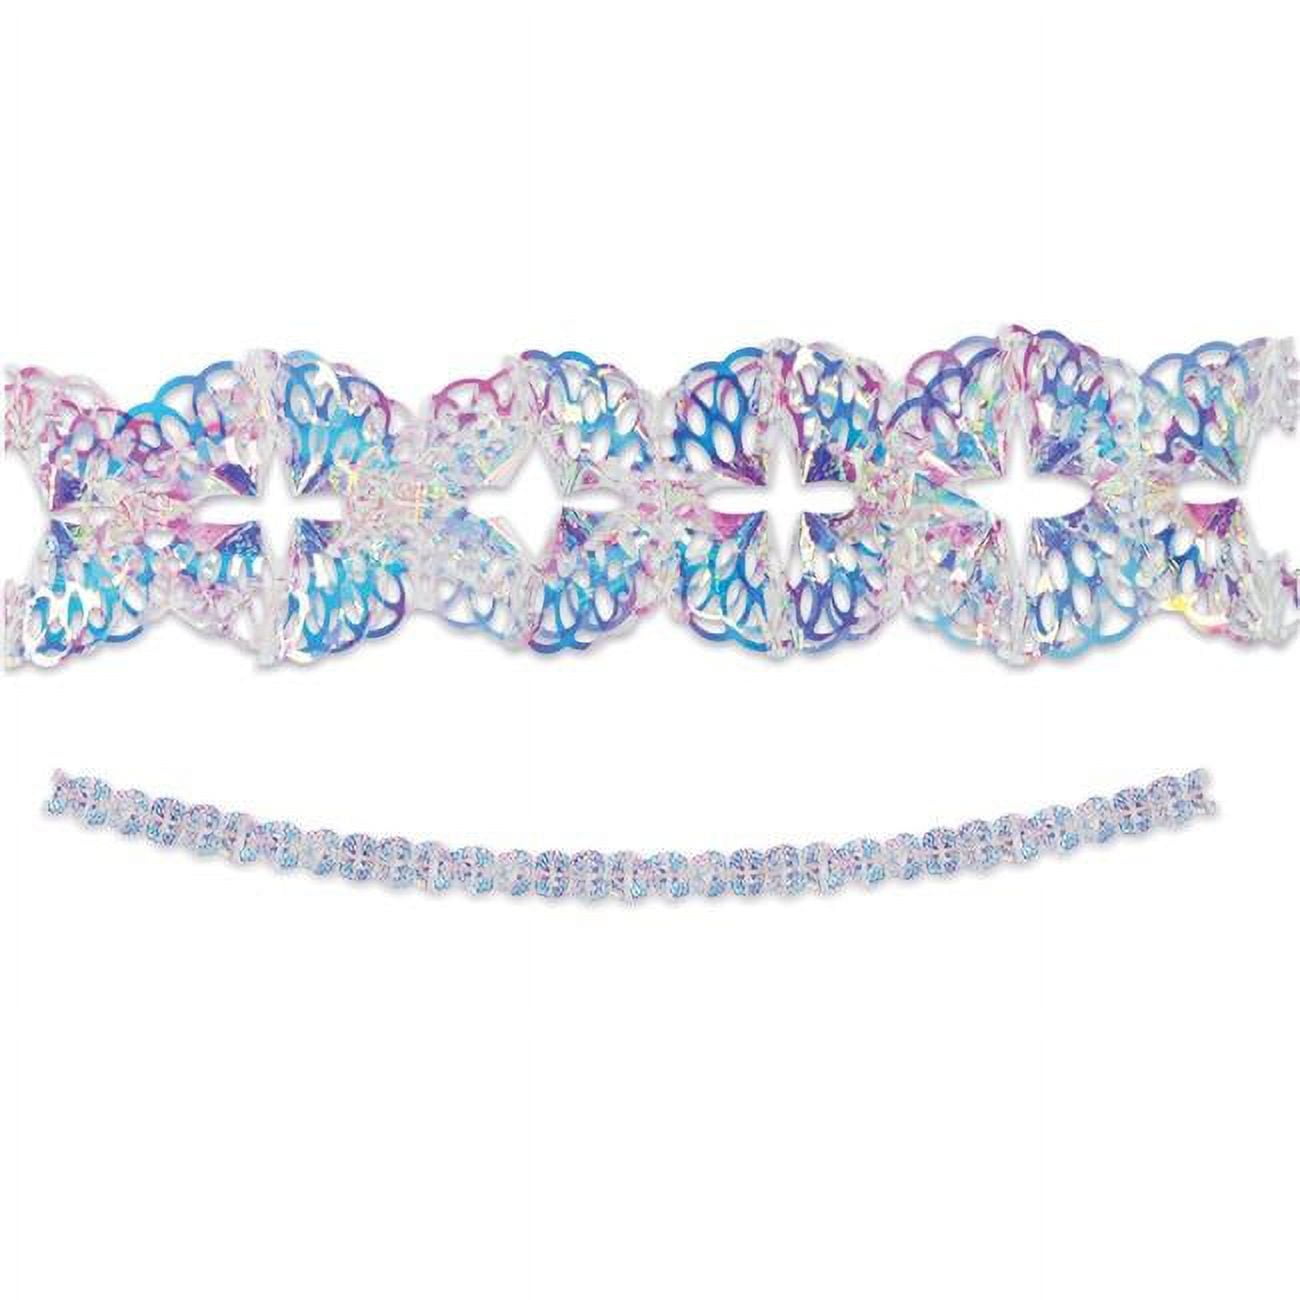 Picture of Beistle 53421 5 in. x 12 ft. Iridescent Garland - Pack of 6